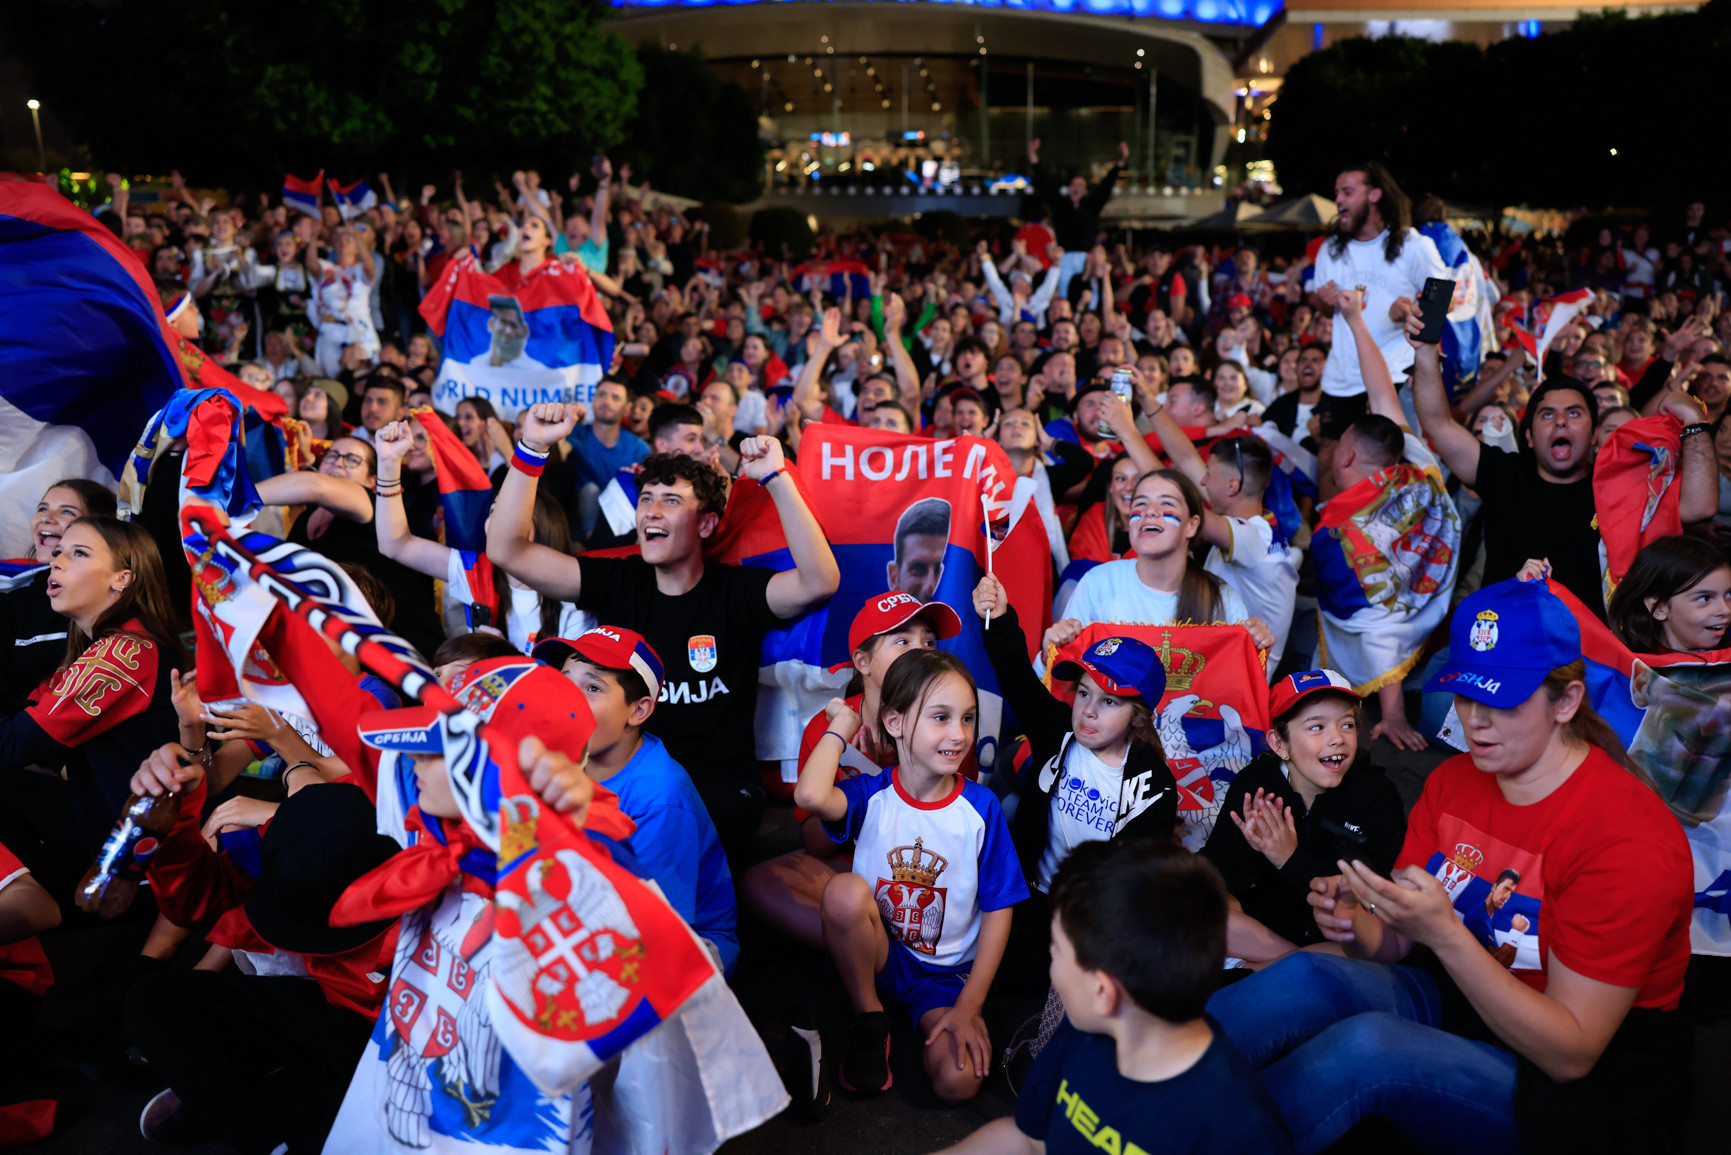 Melbourne Park was full of Serbian fans supporting Djokovic in his quest to win a tenth Australian Open men's singles title ©Getty Images